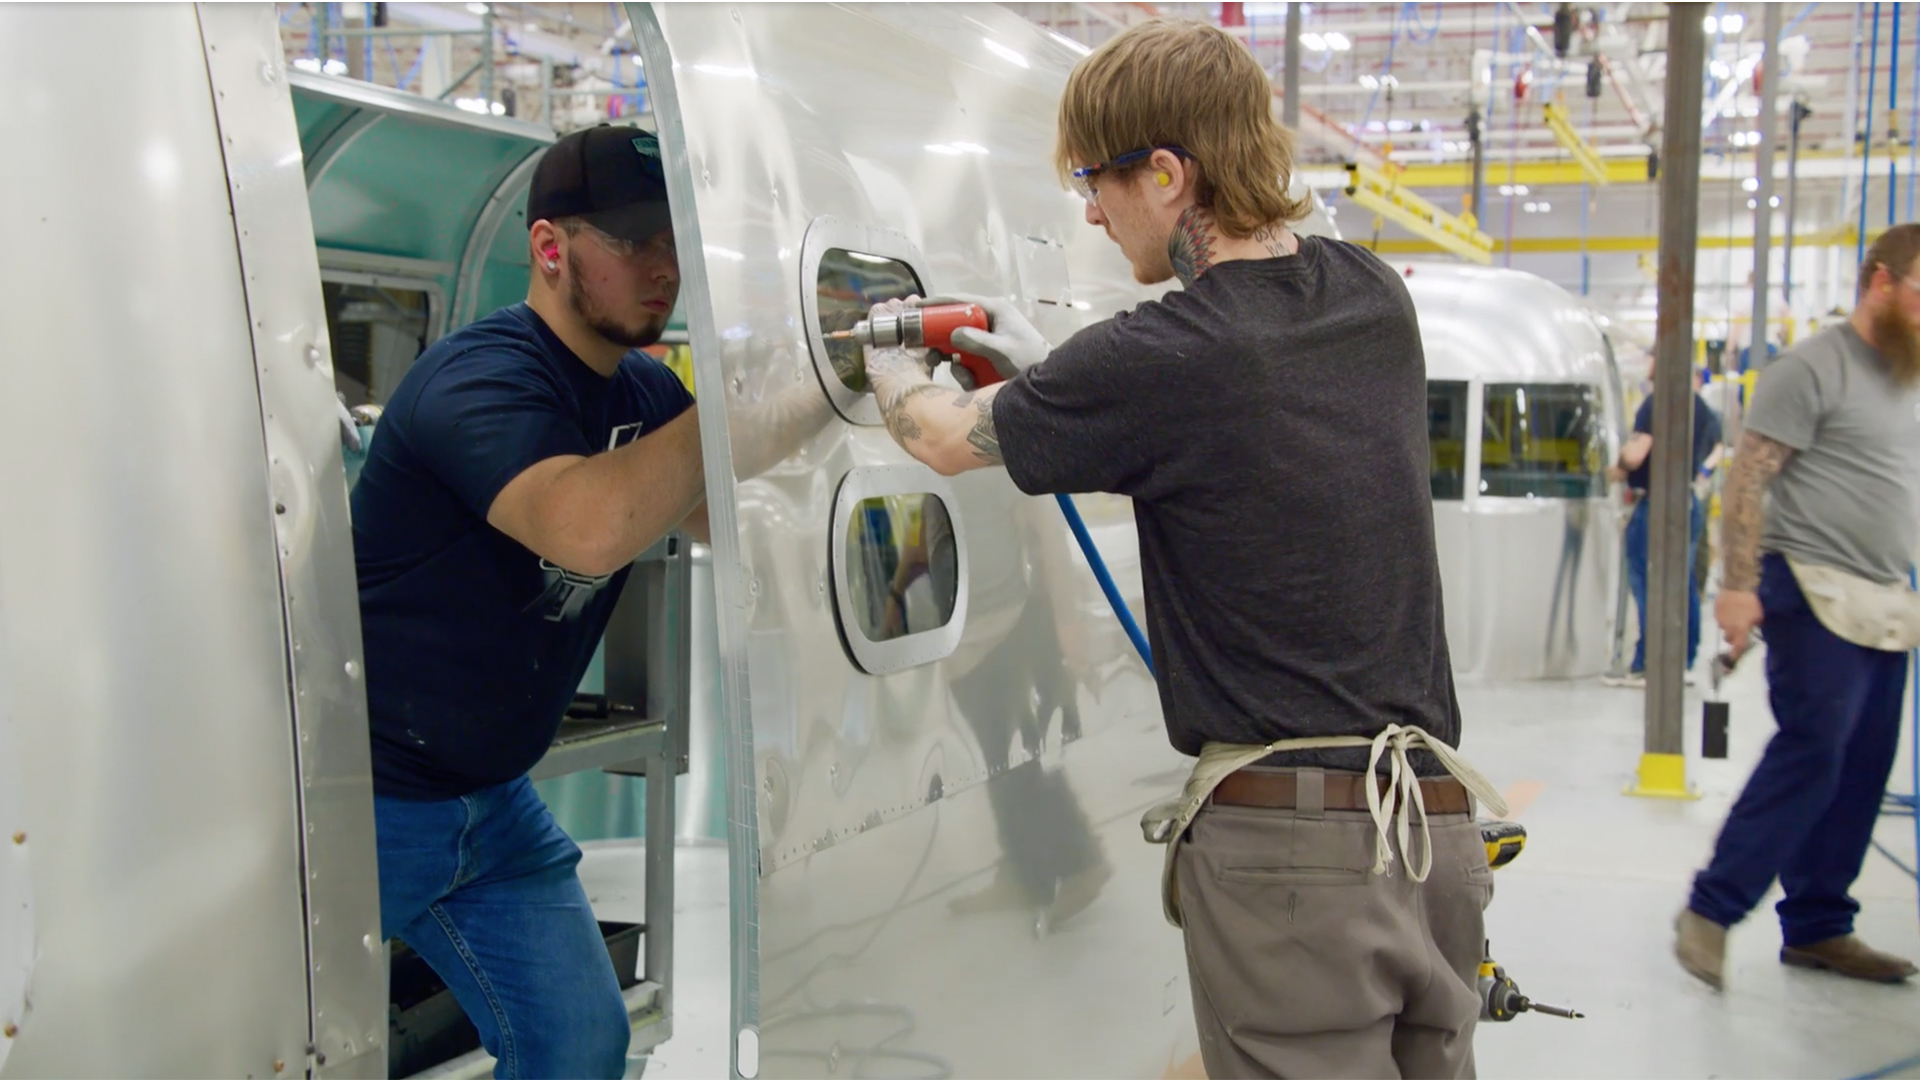 Two Airstream employees working together to rivet an Airstream travel trailer together.